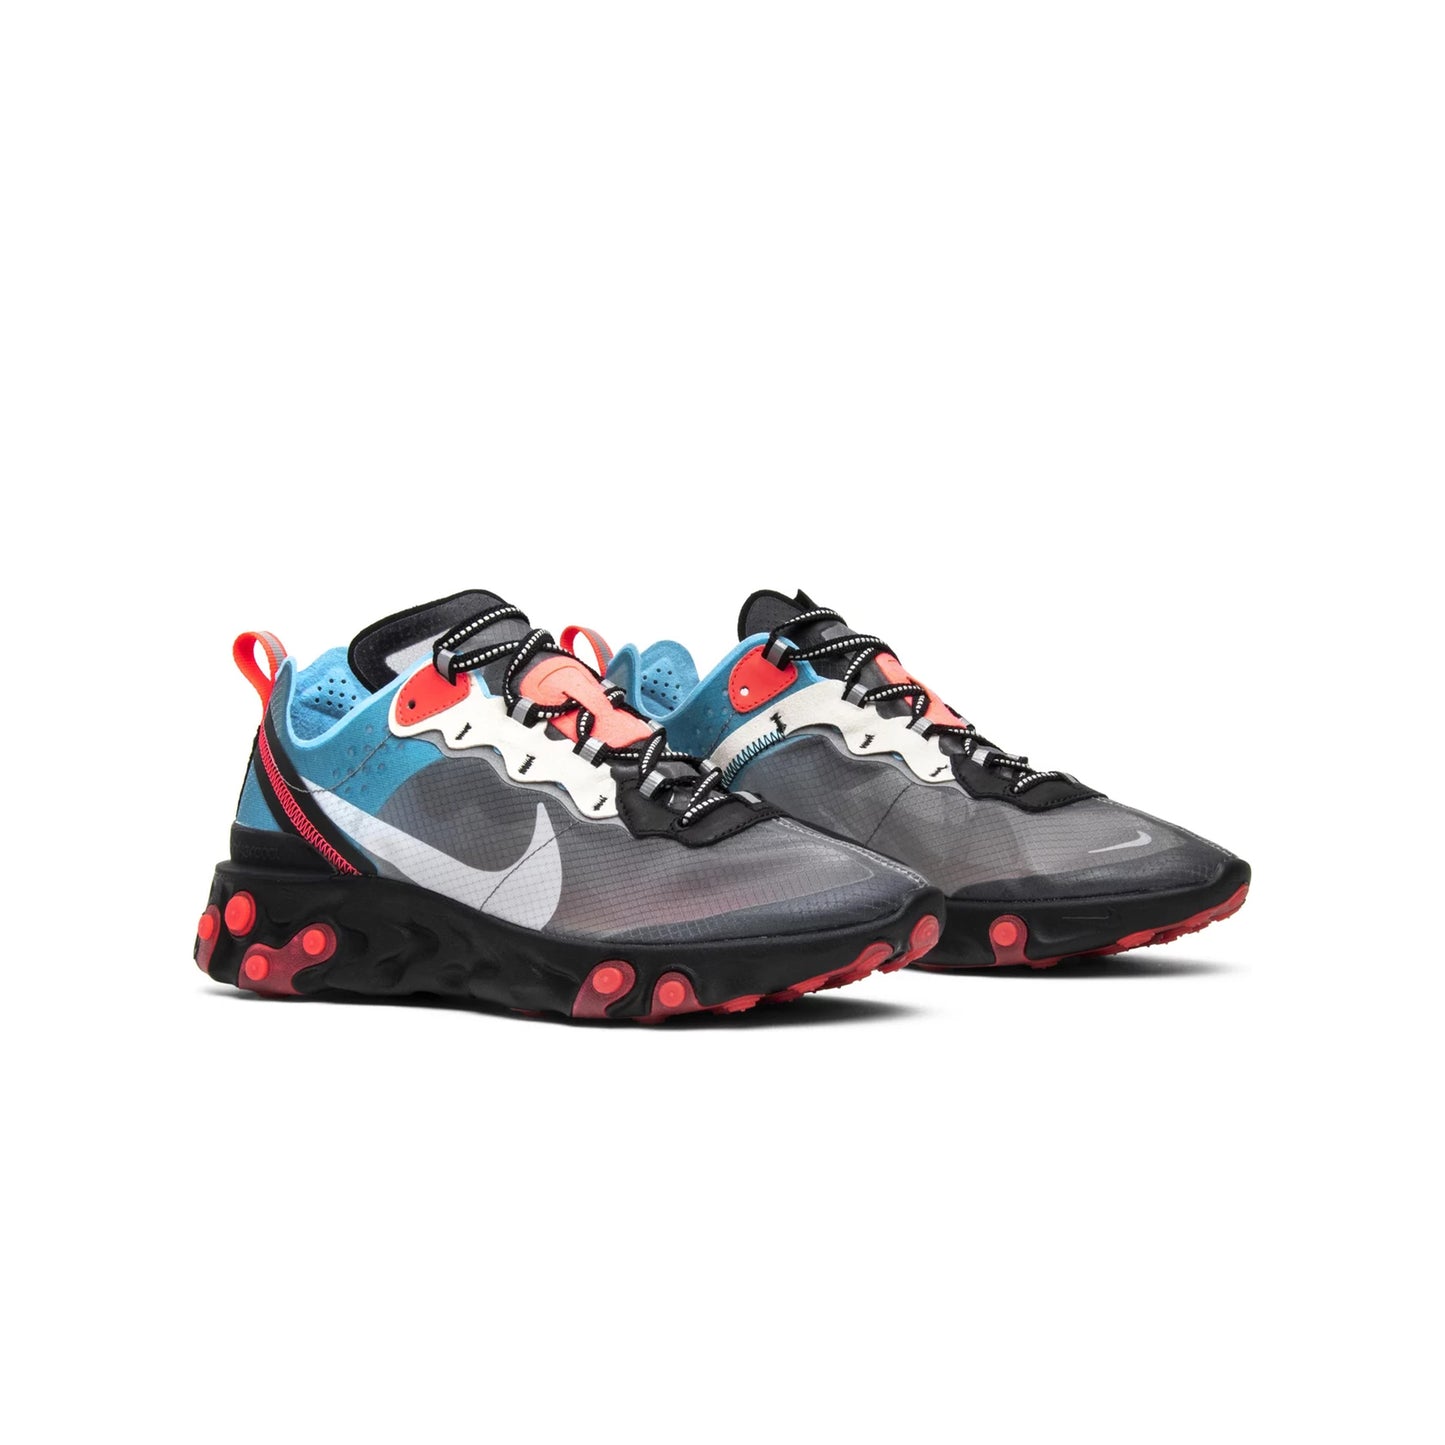 Nike React Element 87 “Black/Cool Grey/Blue Chill/Solar Red” Men's